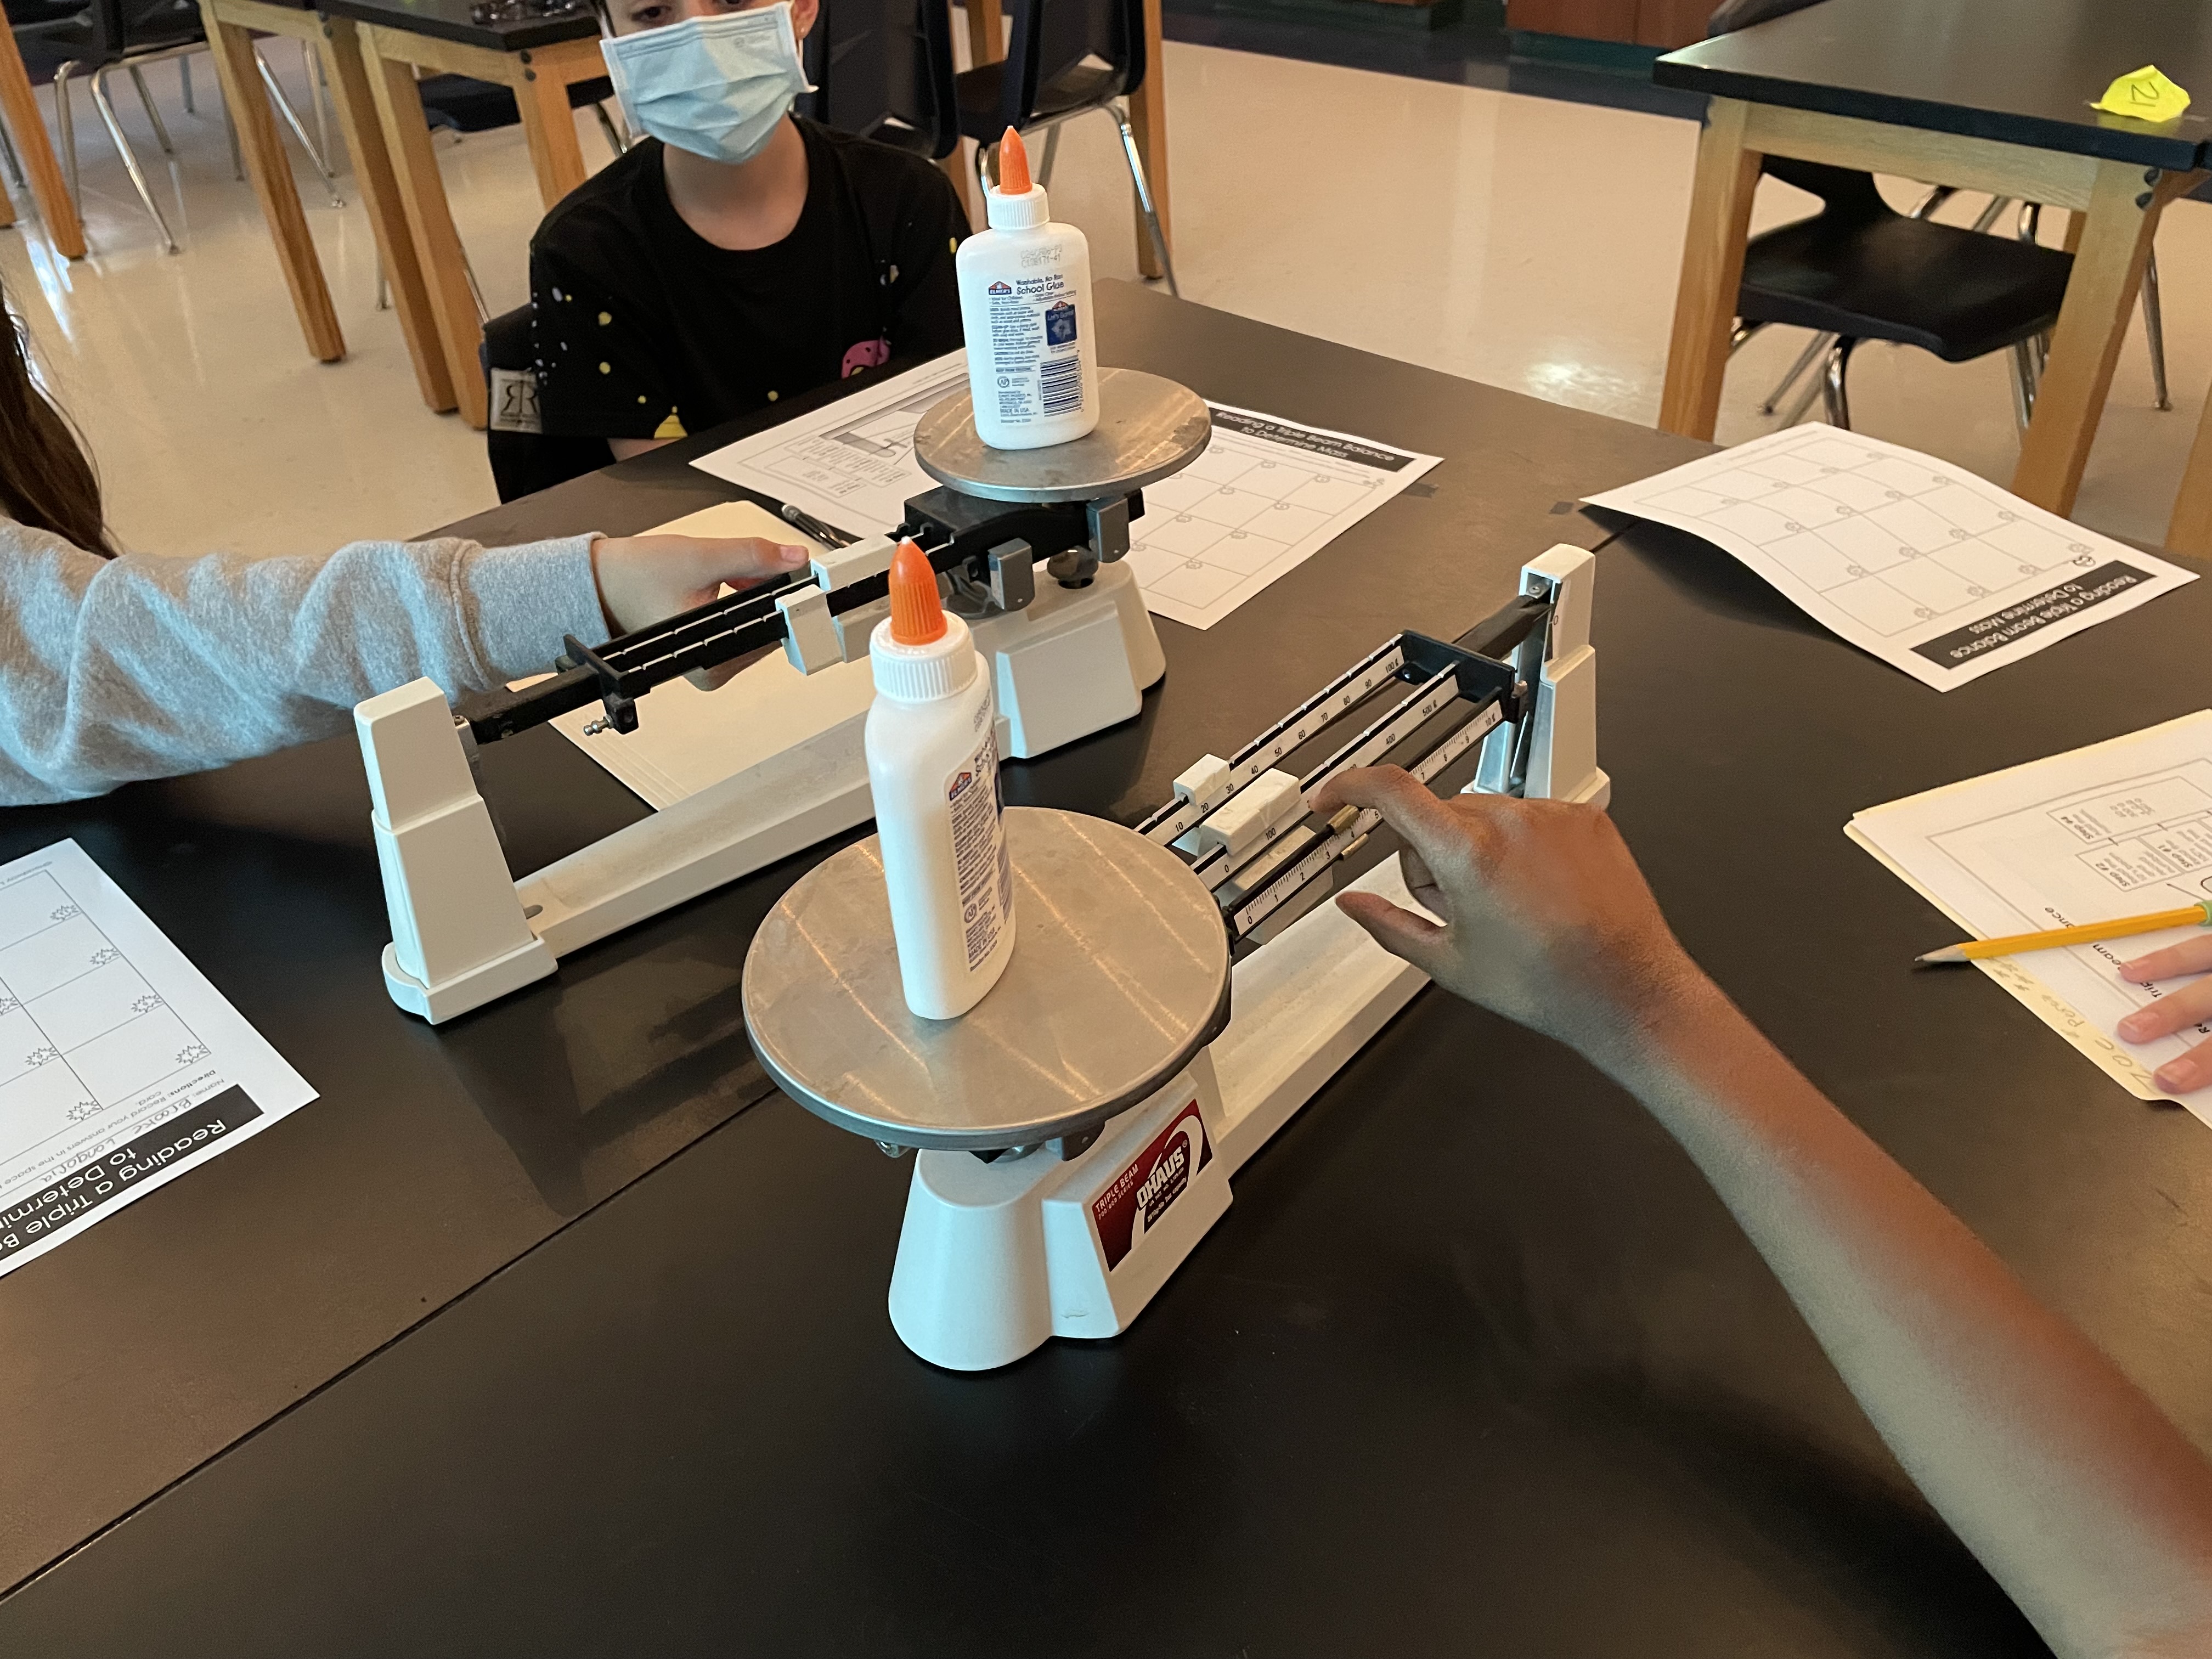 Measuring weight on a triple beam balance